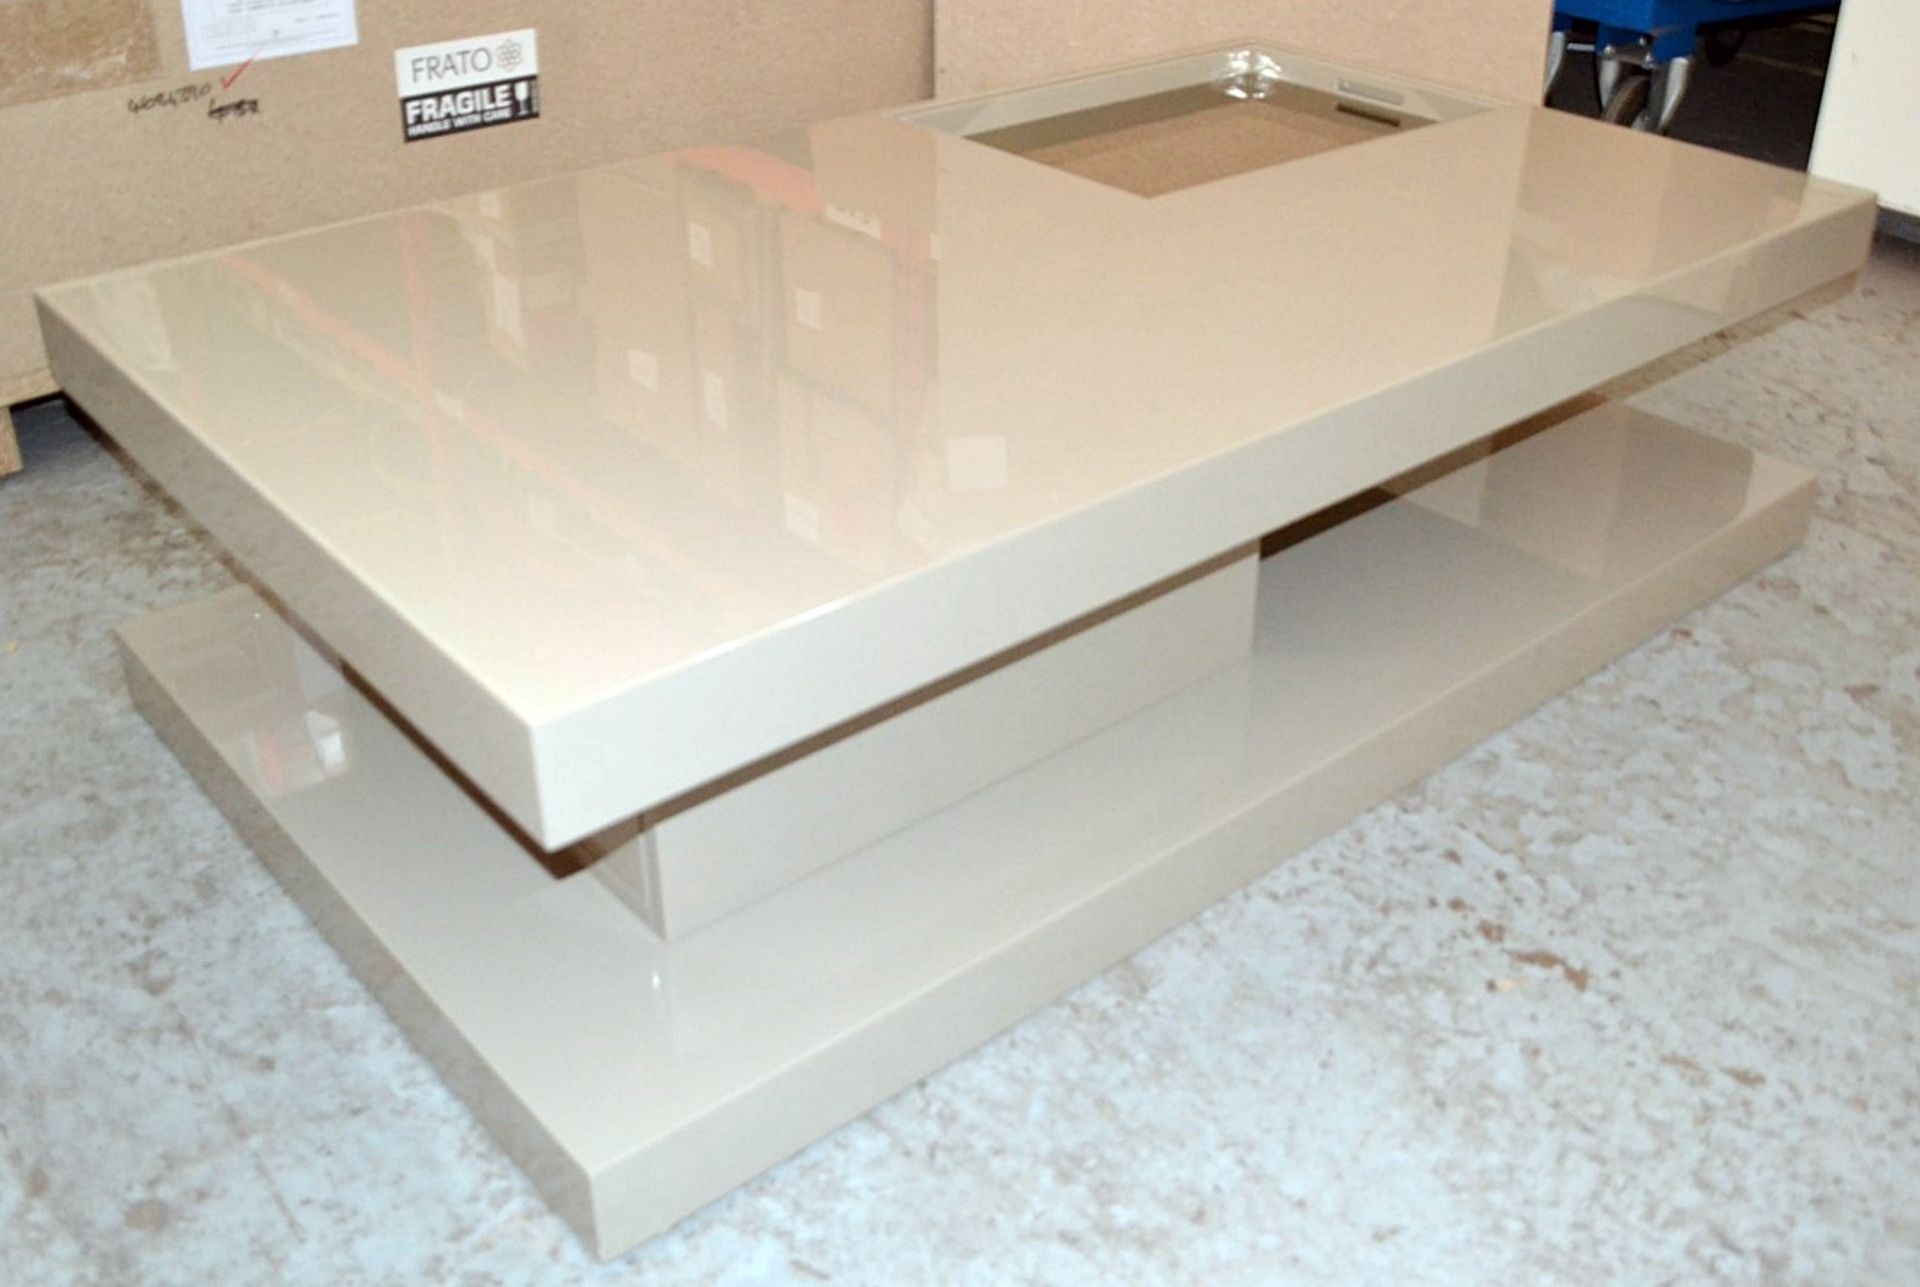 1 x FRATO Saldanha Coffee Table - Features A Push-To-Open Drawer, And Light Grey Lacqured Finish -